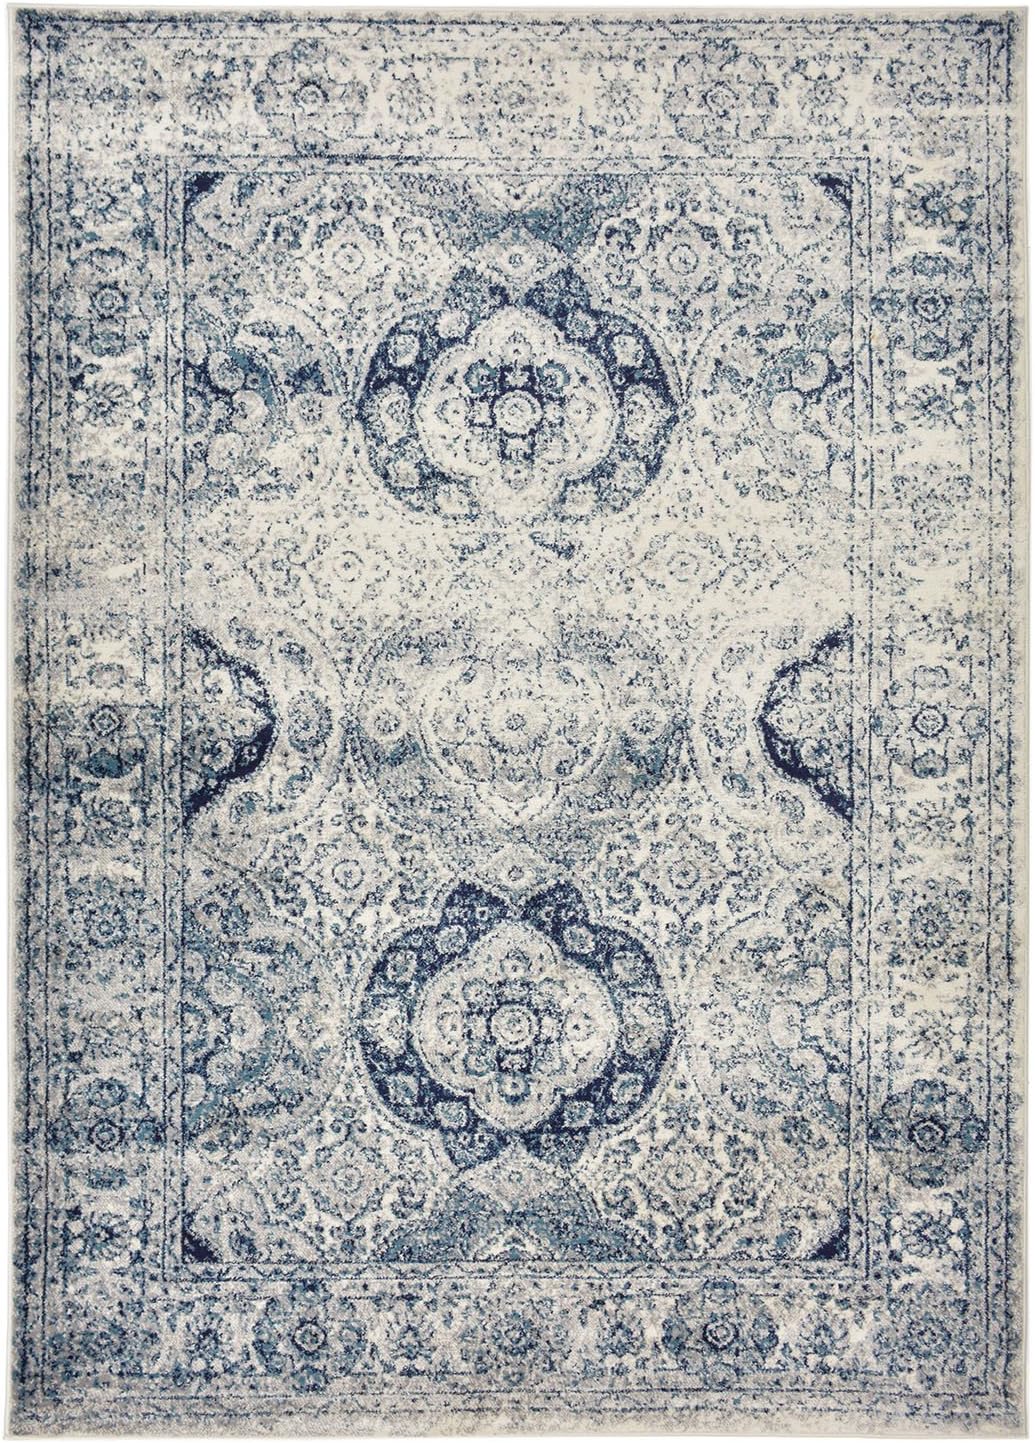 Studio Collection Vintage French Aubusson Design Contemporary Modern Area Rug (Aubusson Ivory / Navy, 5 x 7)